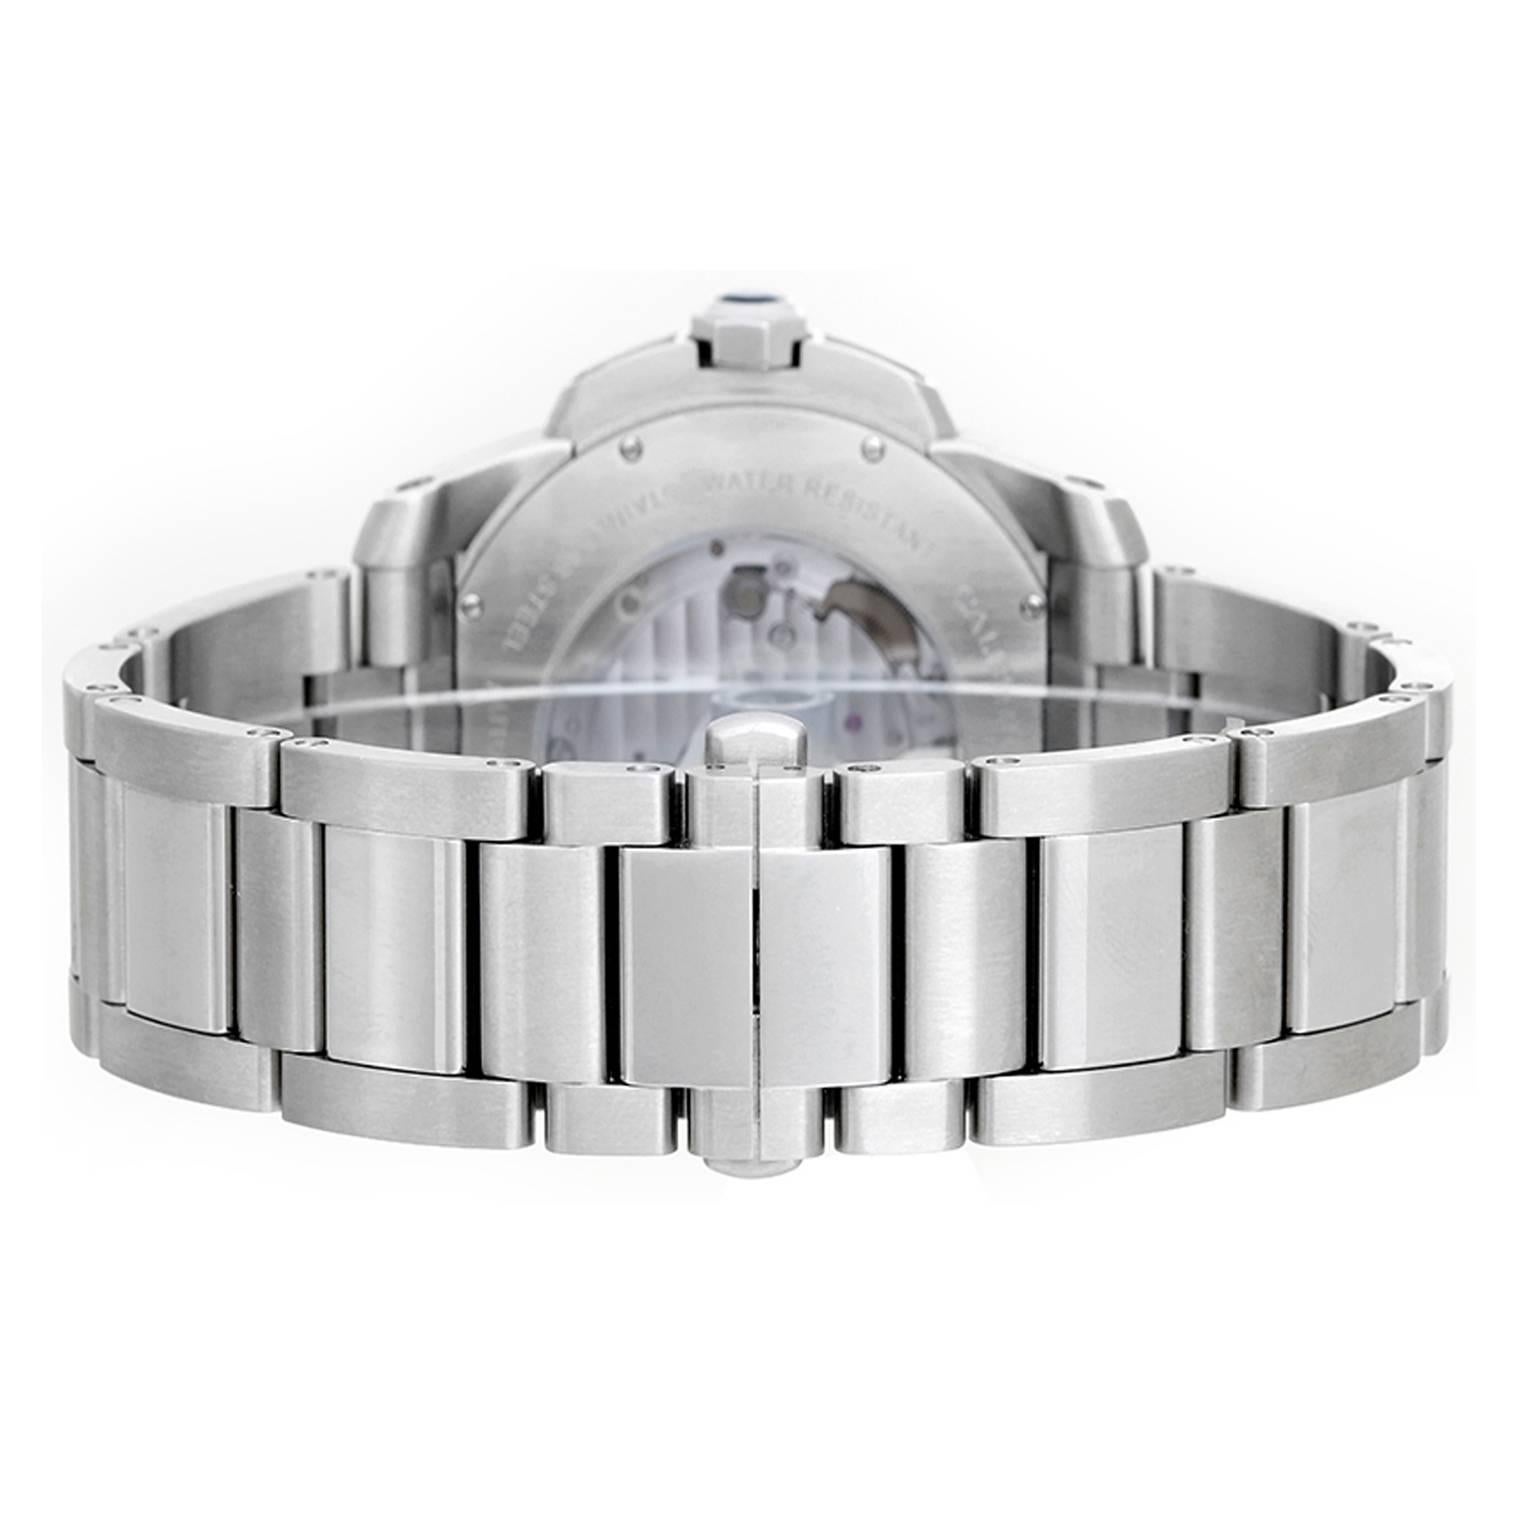 Cartier Calibre Stainless Steel Men's 42mm Watch W7100015 -  Automatic winding. Stainless steel case with exposition back  (42mm diameter). Silvered dial with Roman numerals; subseconds; date at 3 o'clock. Stainless steel Cartier bracelet. Pre-owned